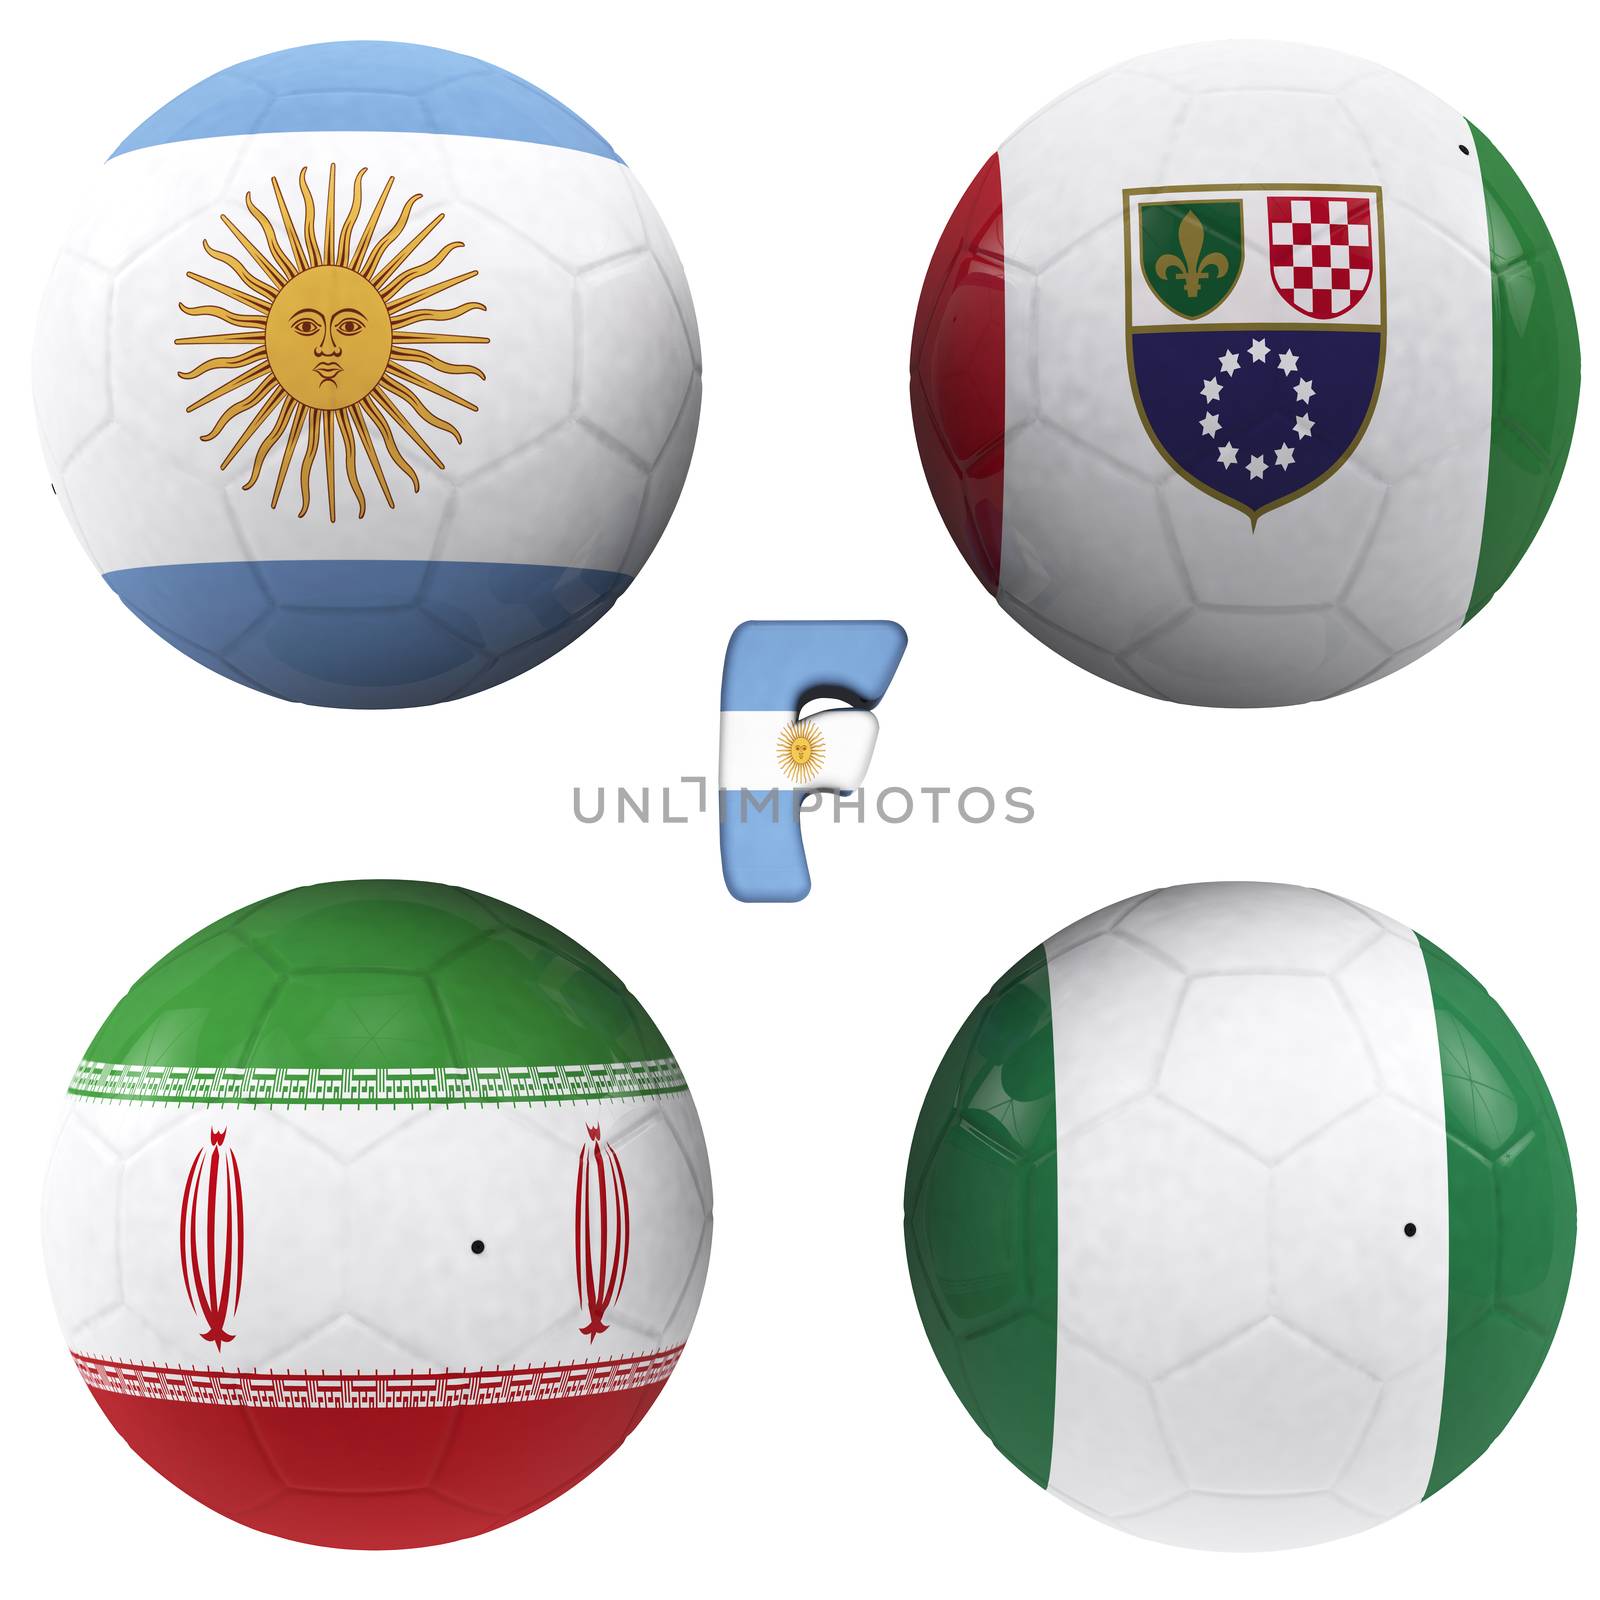 F group of the World Cup by croreja